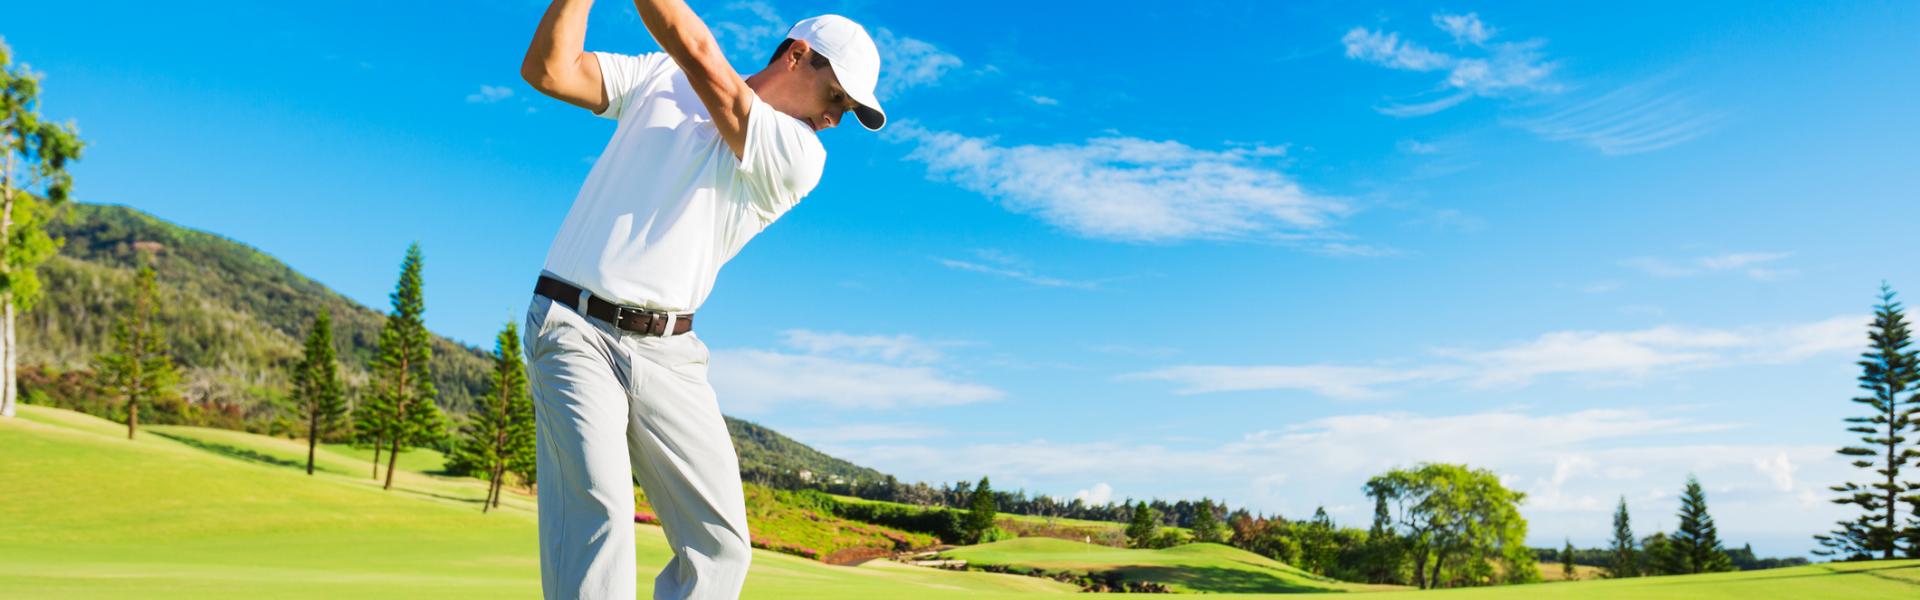 Golf Holidays in the USA - HomeToGo